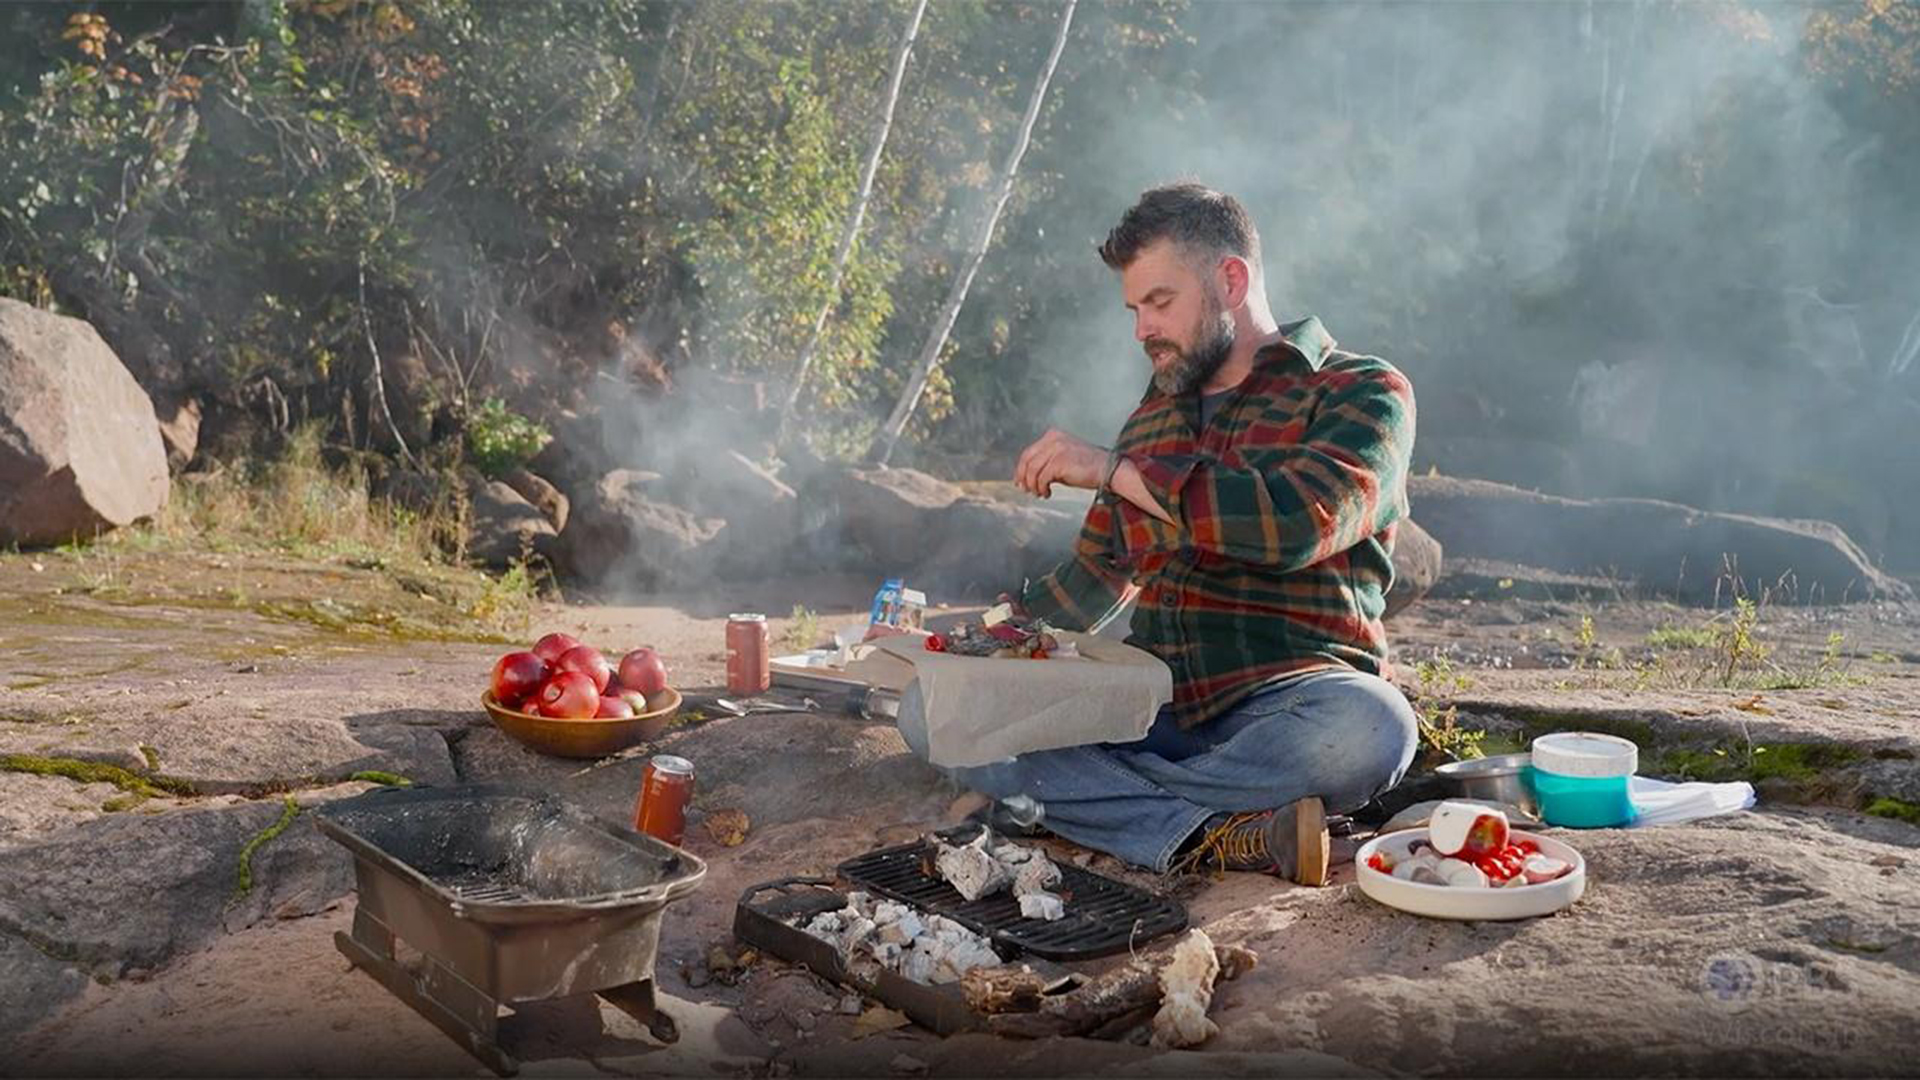 A man sits near an outdoor fire ring cooking fish and apples.